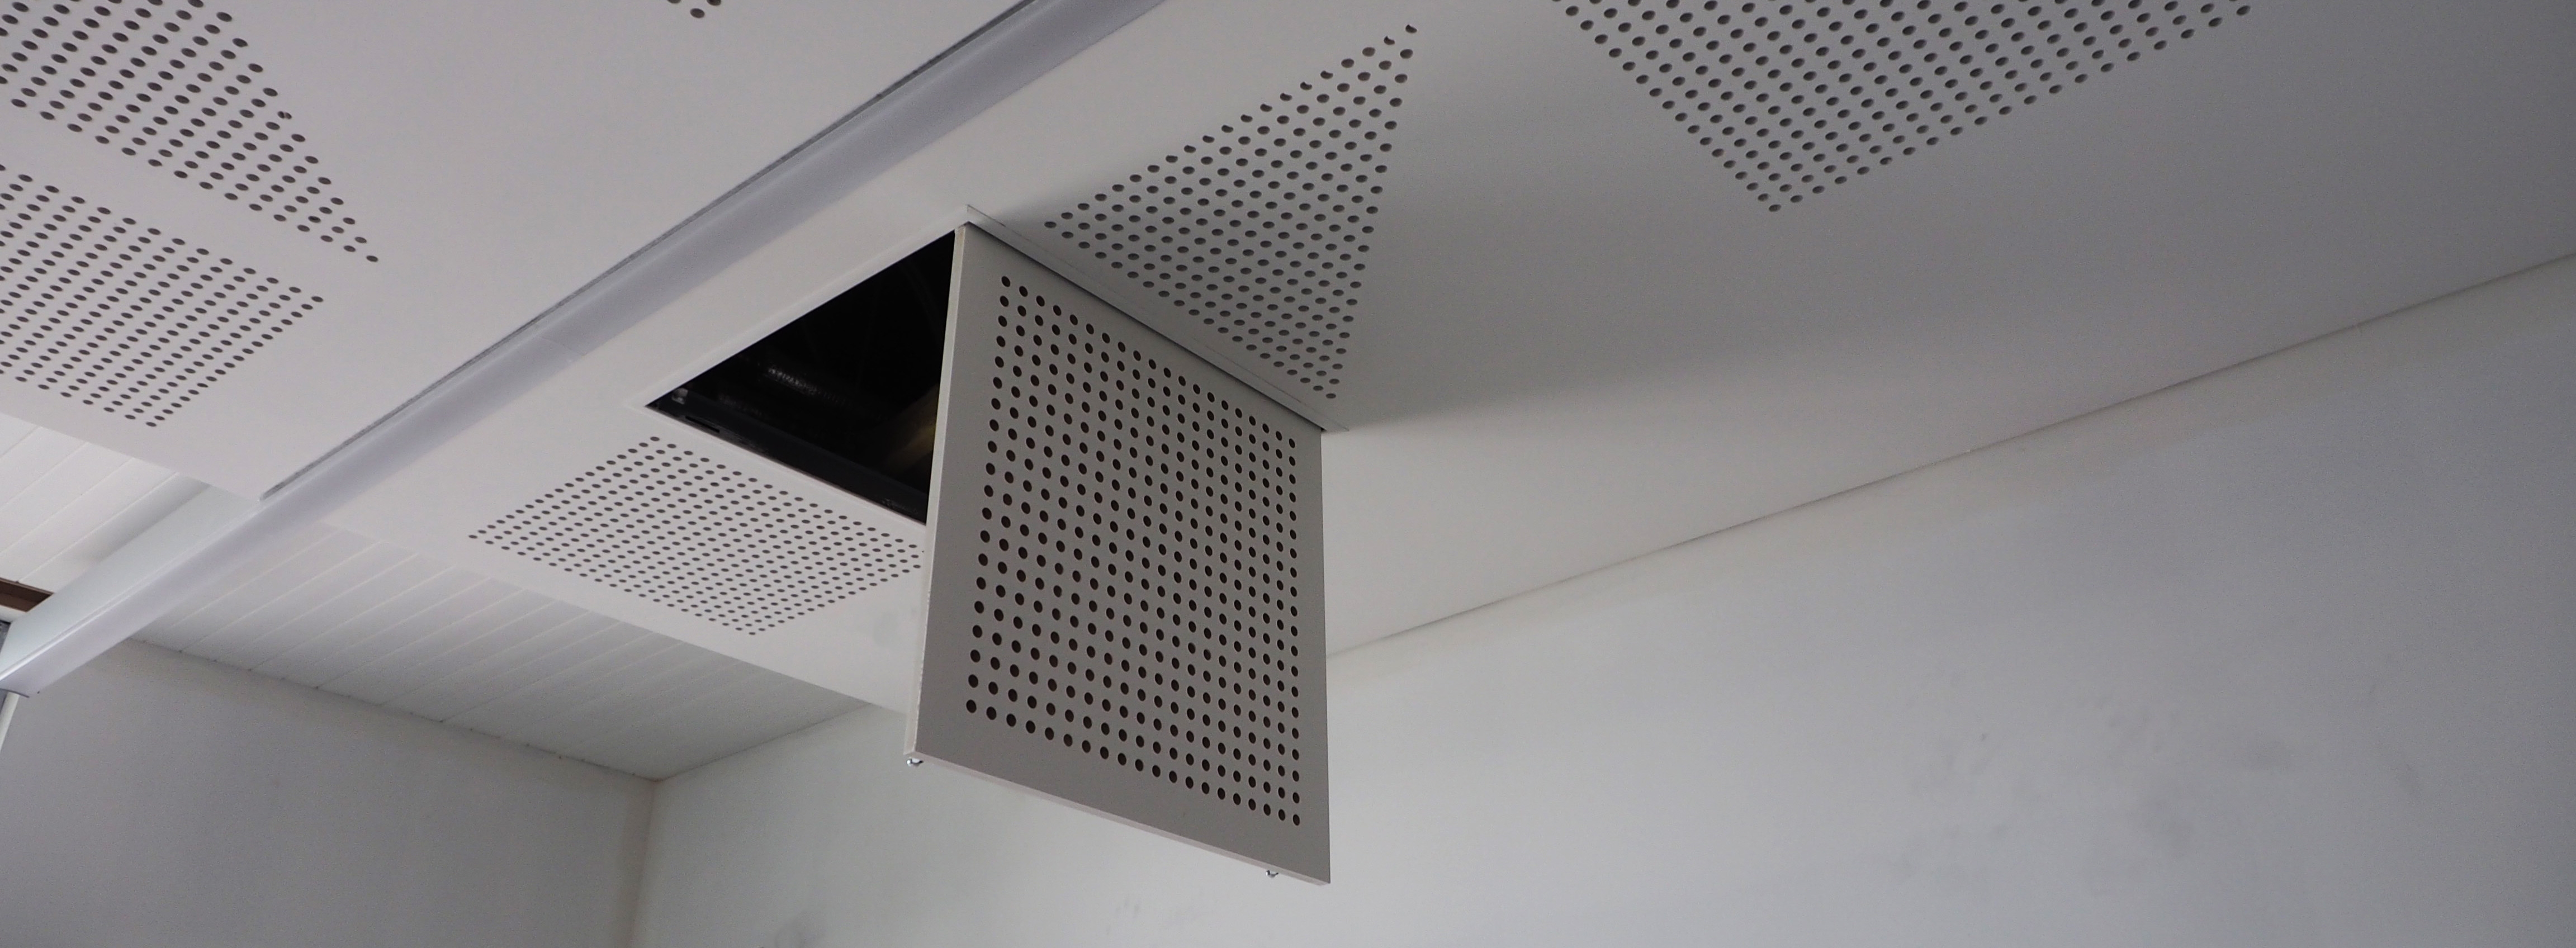 Ceiling Tile Access Panelcomfab products access panels data racks cabinets